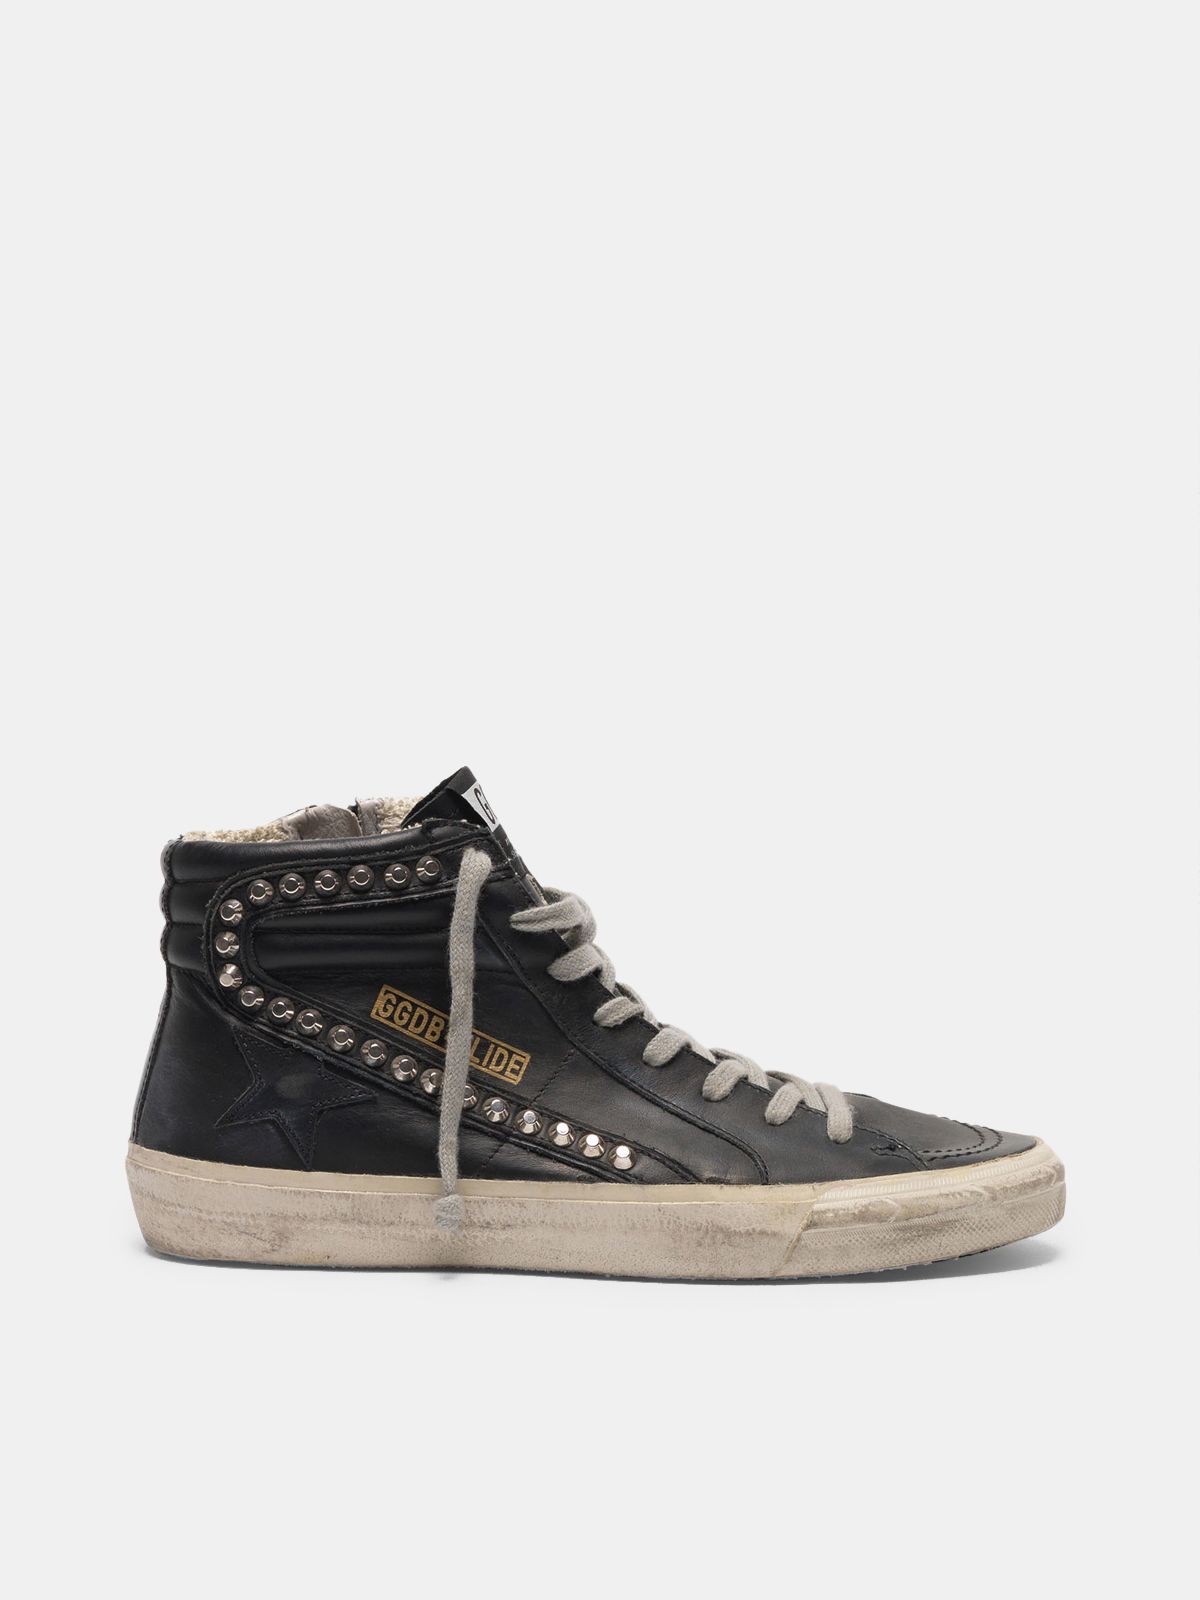 Slide sneakers in metal studded leather | 